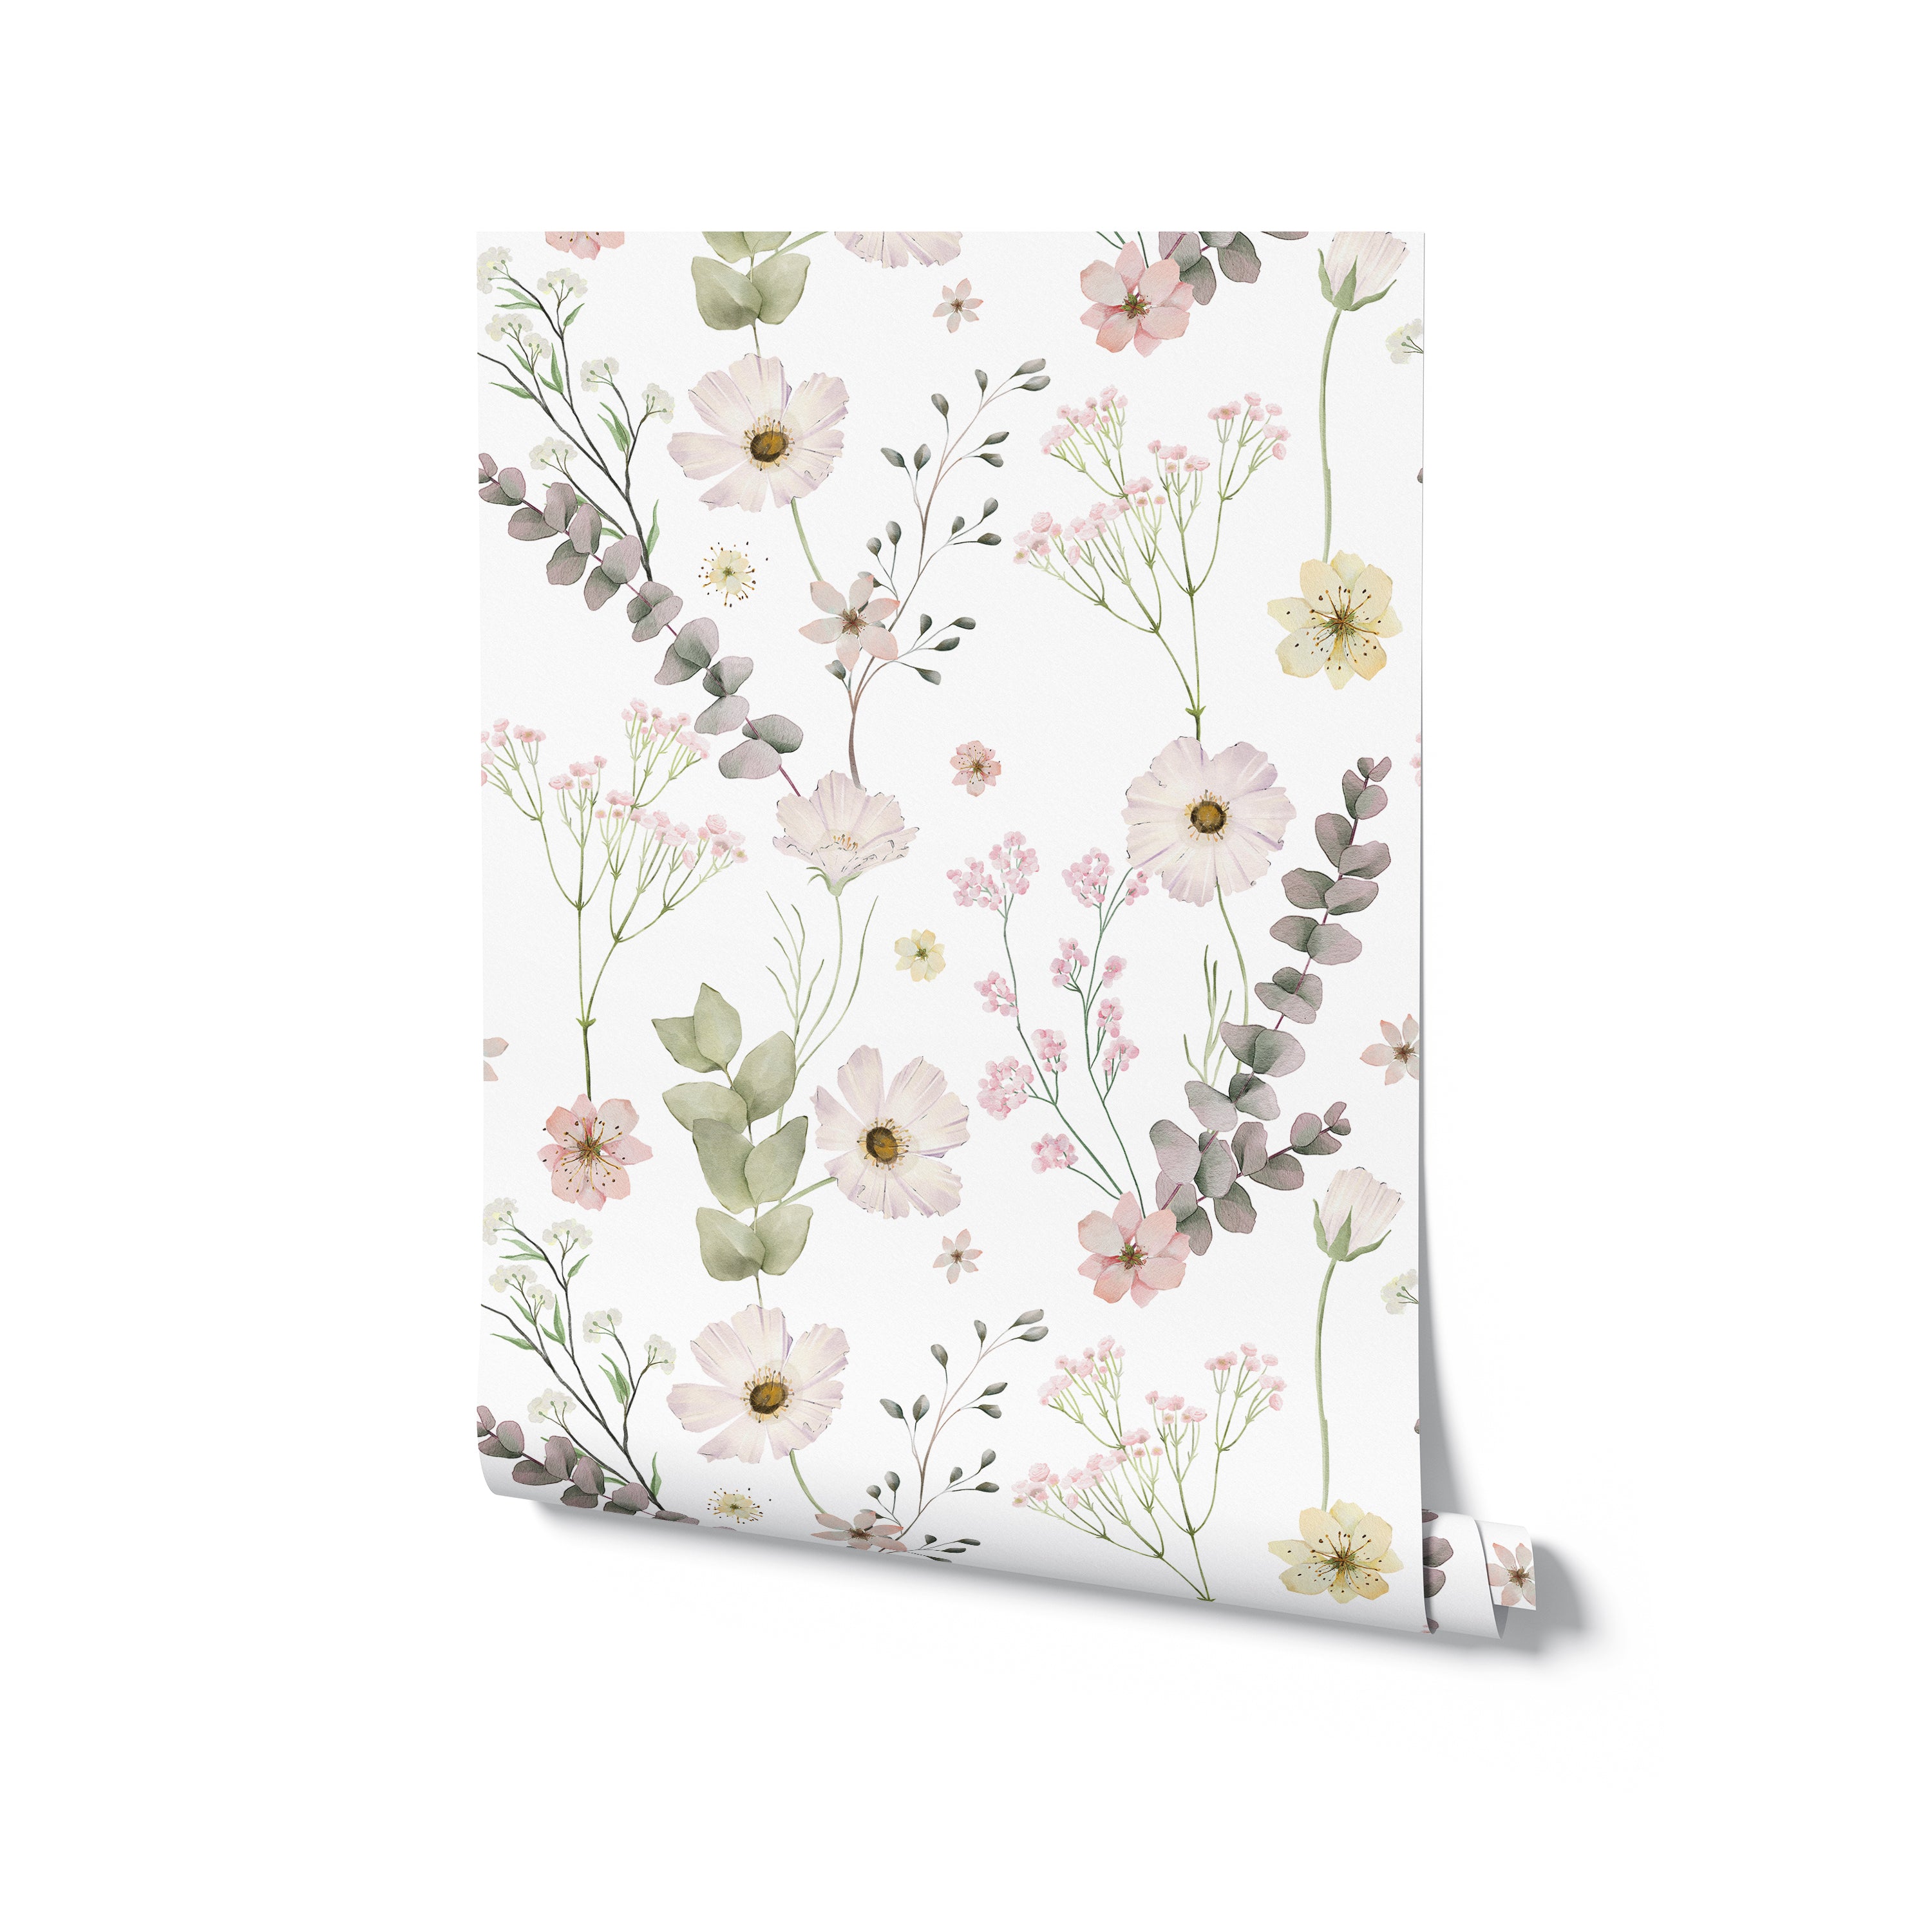 An angled view of the Botanical Muse Wallpaper roll against a white background. The visible section of the wallpaper displays the charming pattern of pastel flowers and foliage, evoking a tranquil and fresh atmosphere.